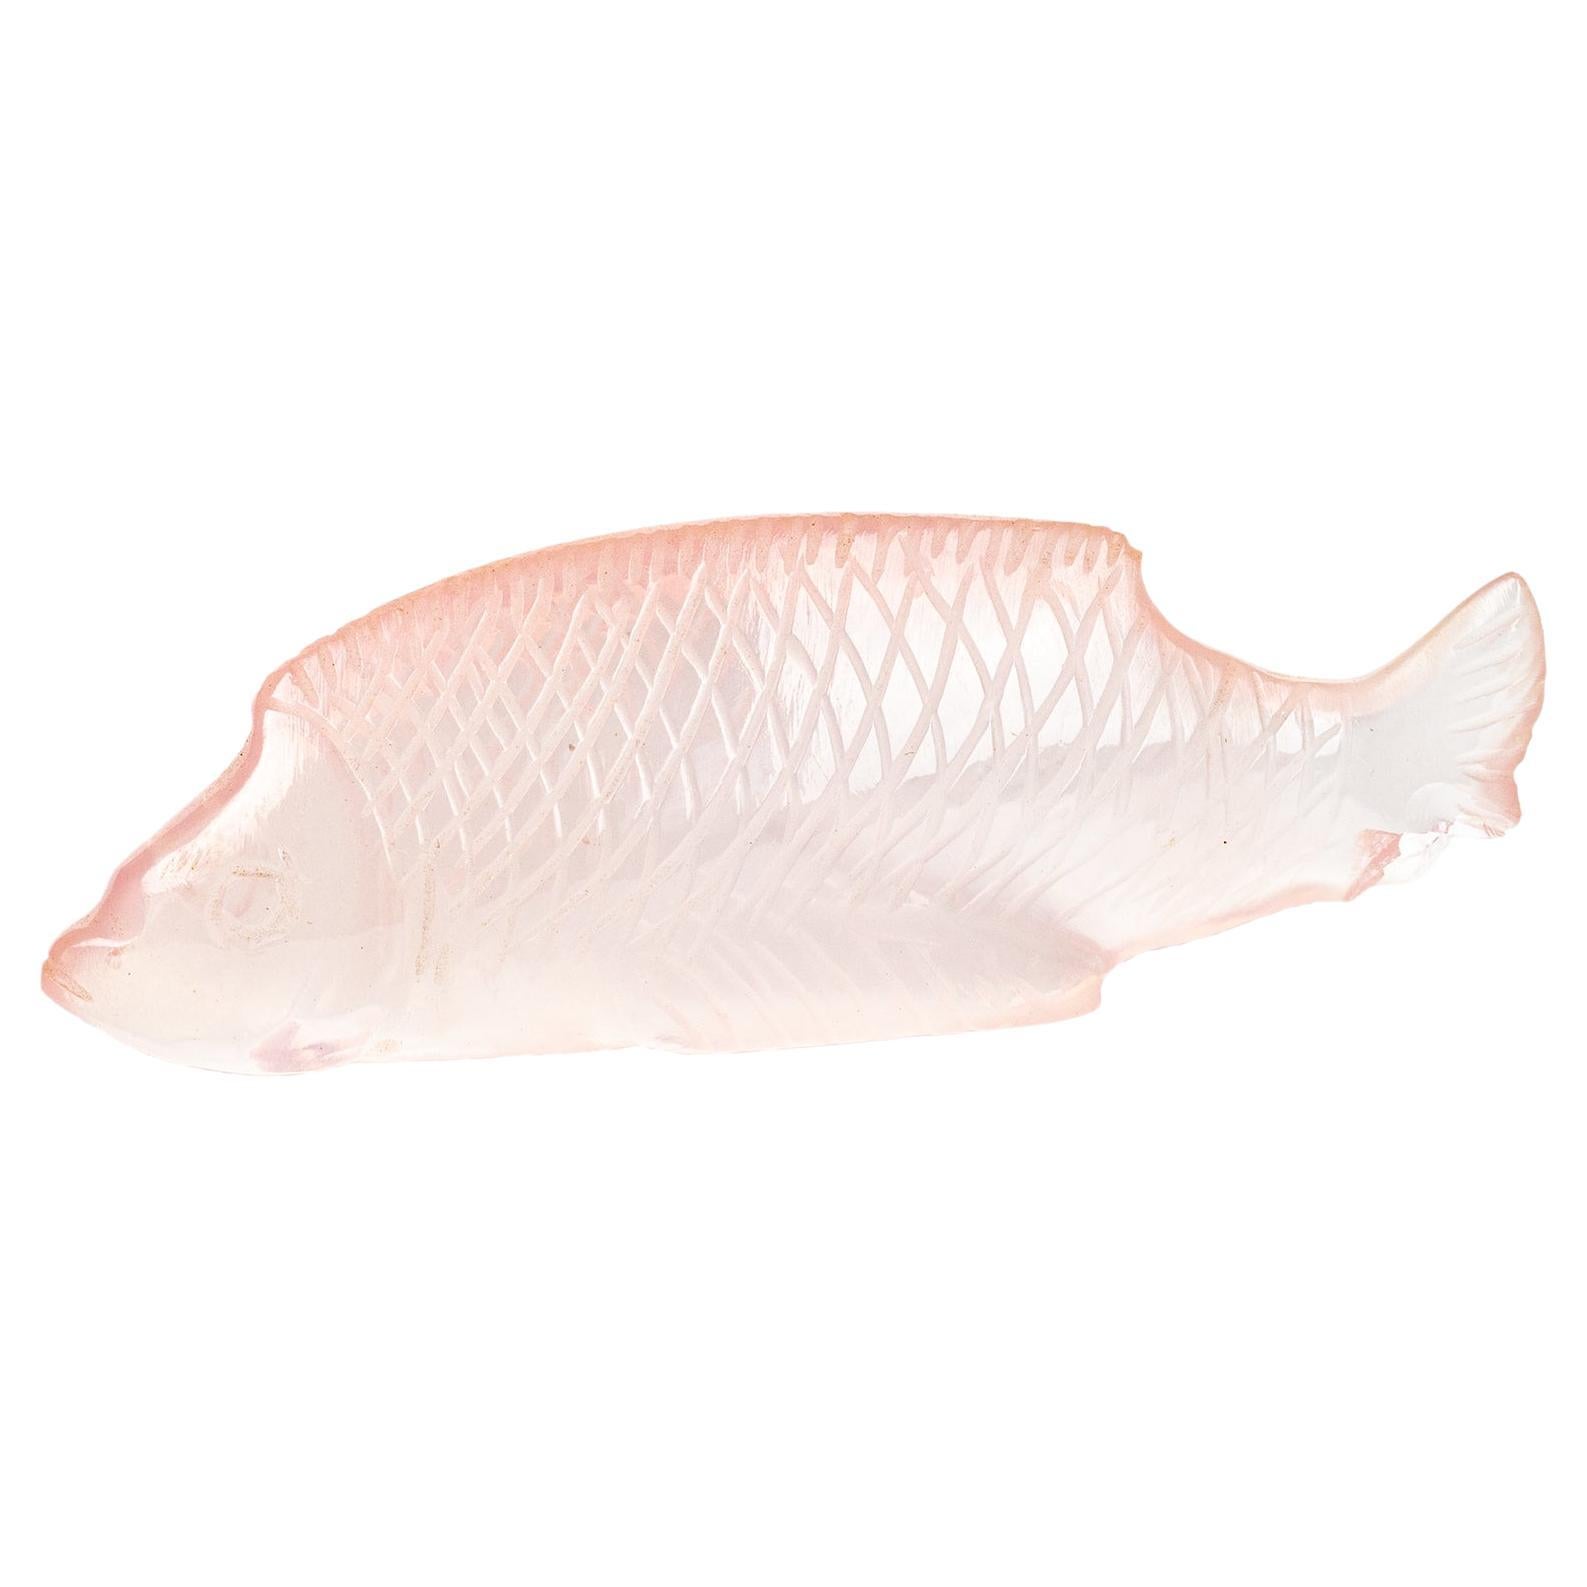 Art Deco Sabino Artistic Pink Glass Opalescent 'Fish' by Marius Ernest Sabino For Sale